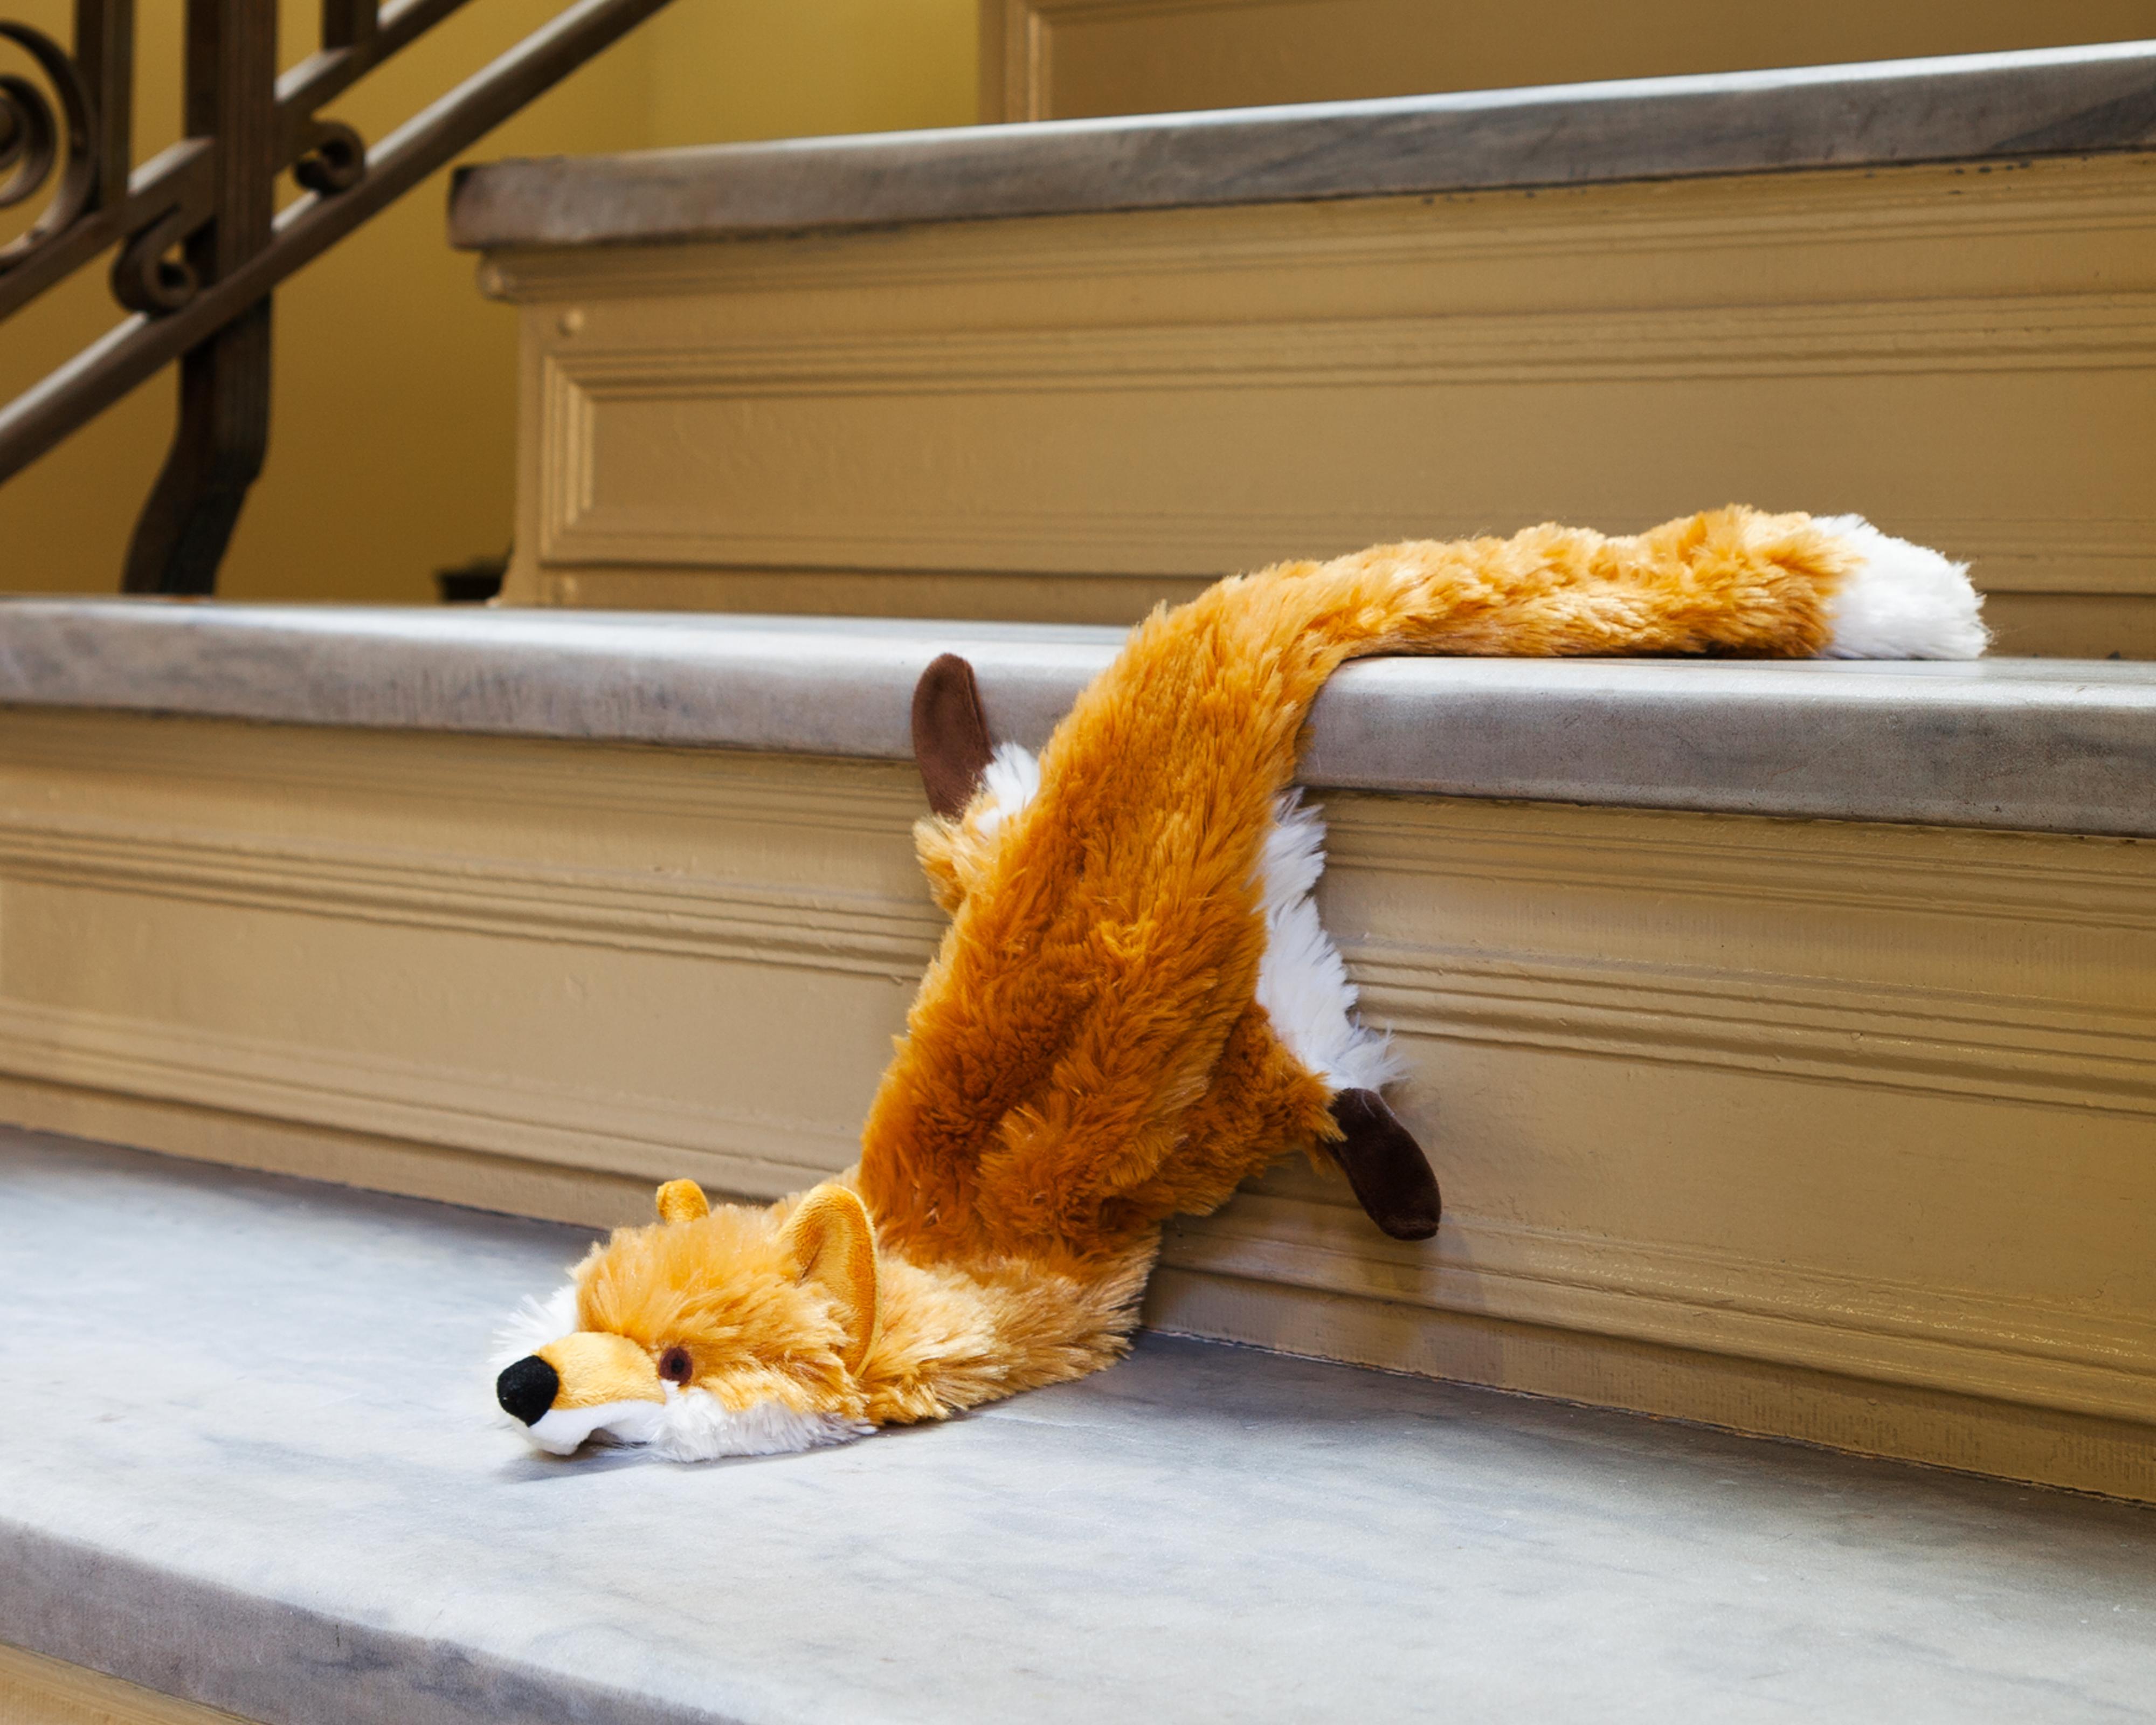 “Morbidity & Mortality: Fox” Humorous Photograph of a Dog Toy in a Crime Scene - Print by Jeanette May